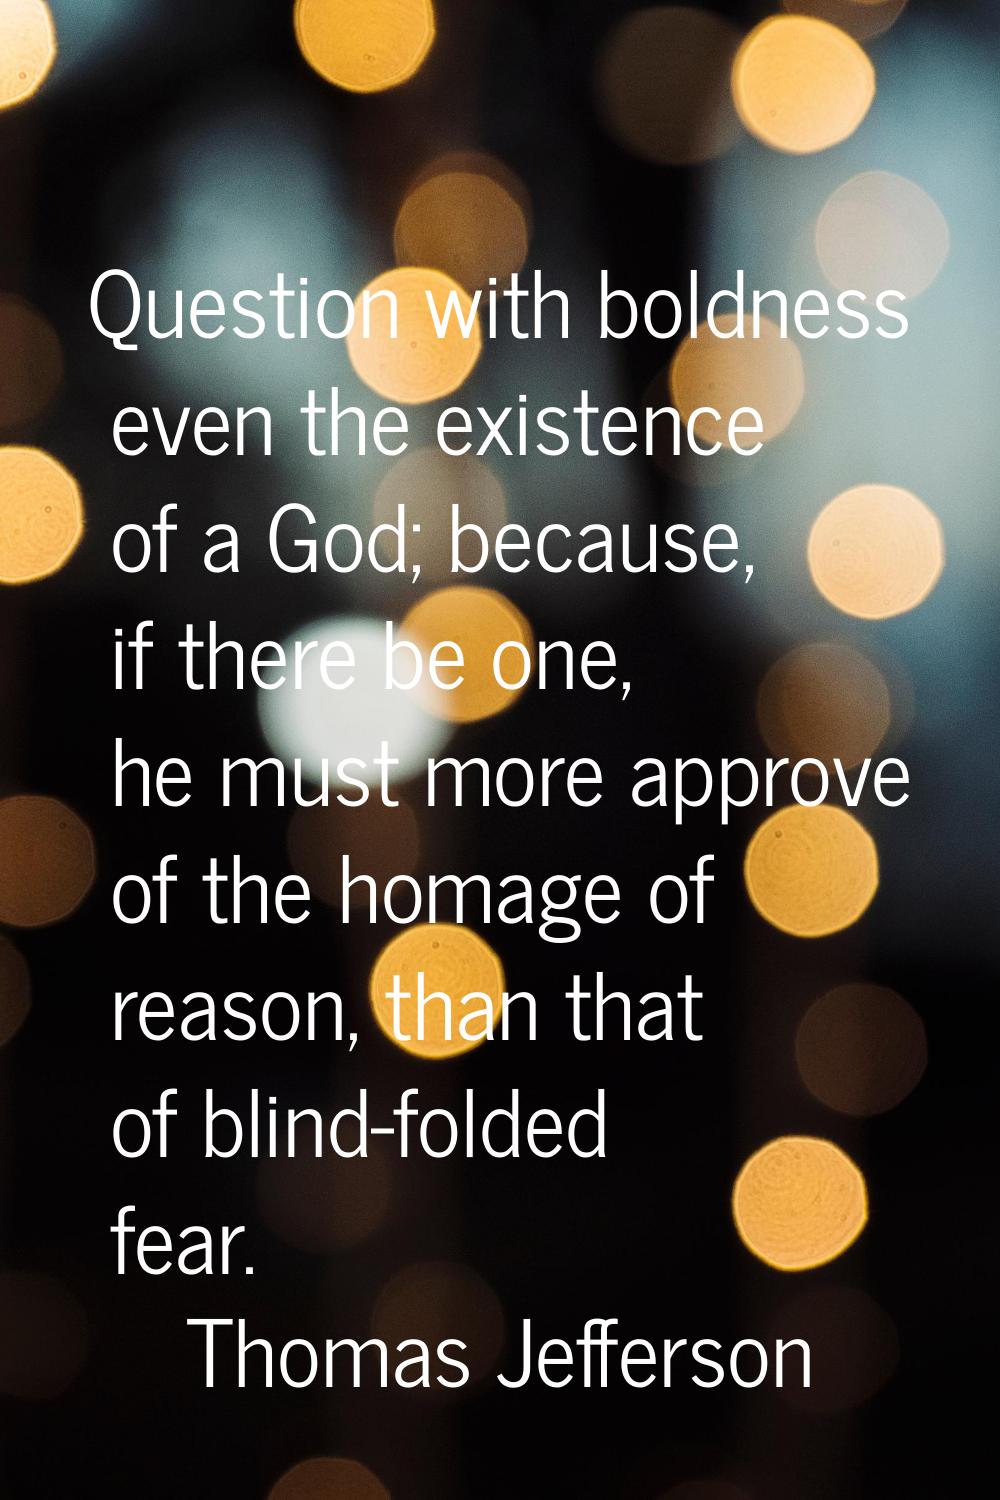 Question with boldness even the existence of a God; because, if there be one, he must more approve 